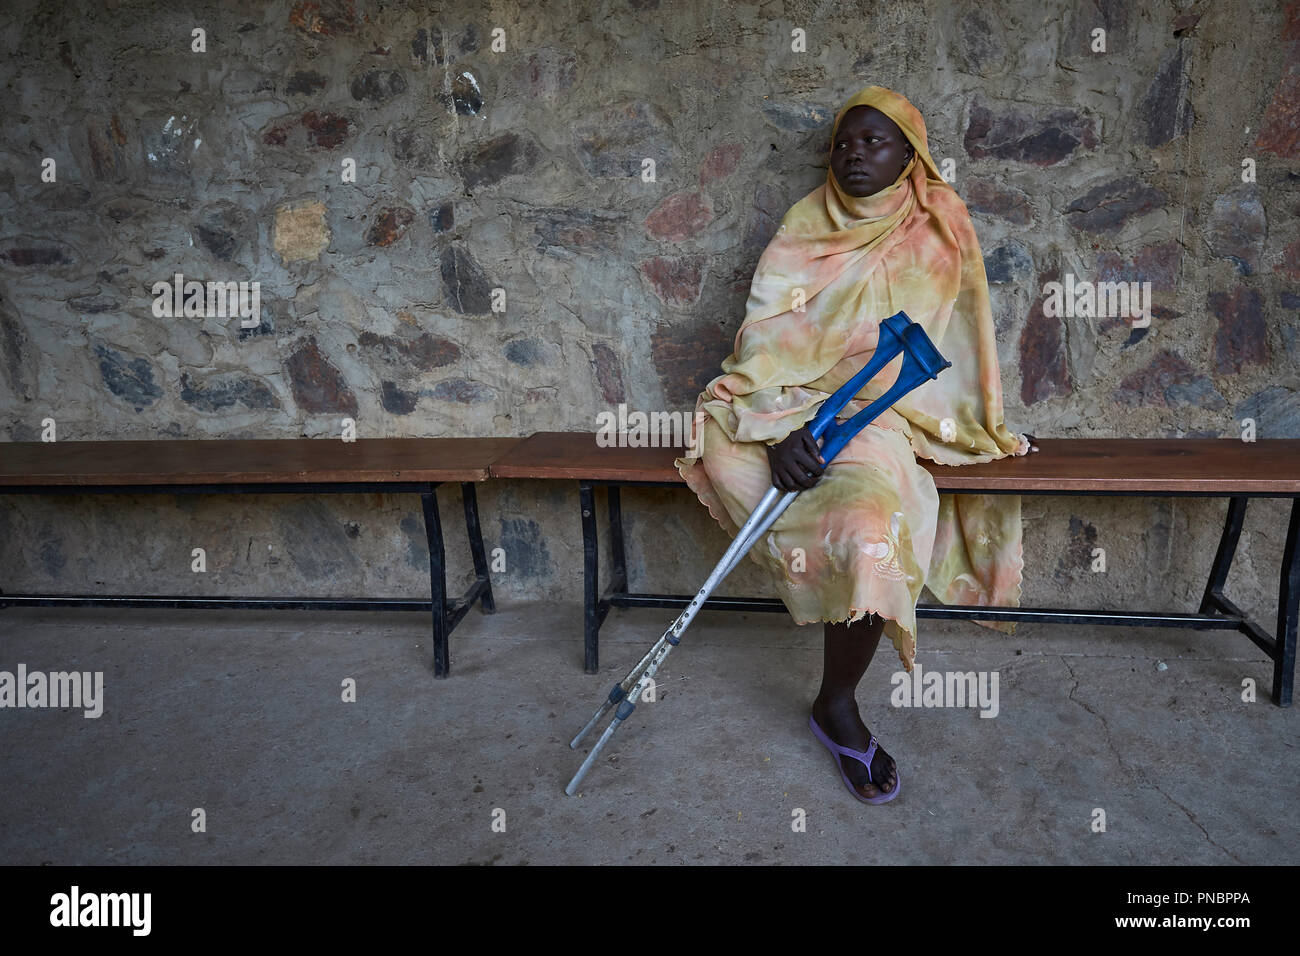 A woman who had a leg amputated seen waiting from outside the prosthetics department of the Mother of Mercy Hospital in Gidel. A village in the Nuba Mountains of Sudan that is controlled by the Sudan People's Liberation Movement-North and it is frequently attacked by the military of Sudan. Stock Photo